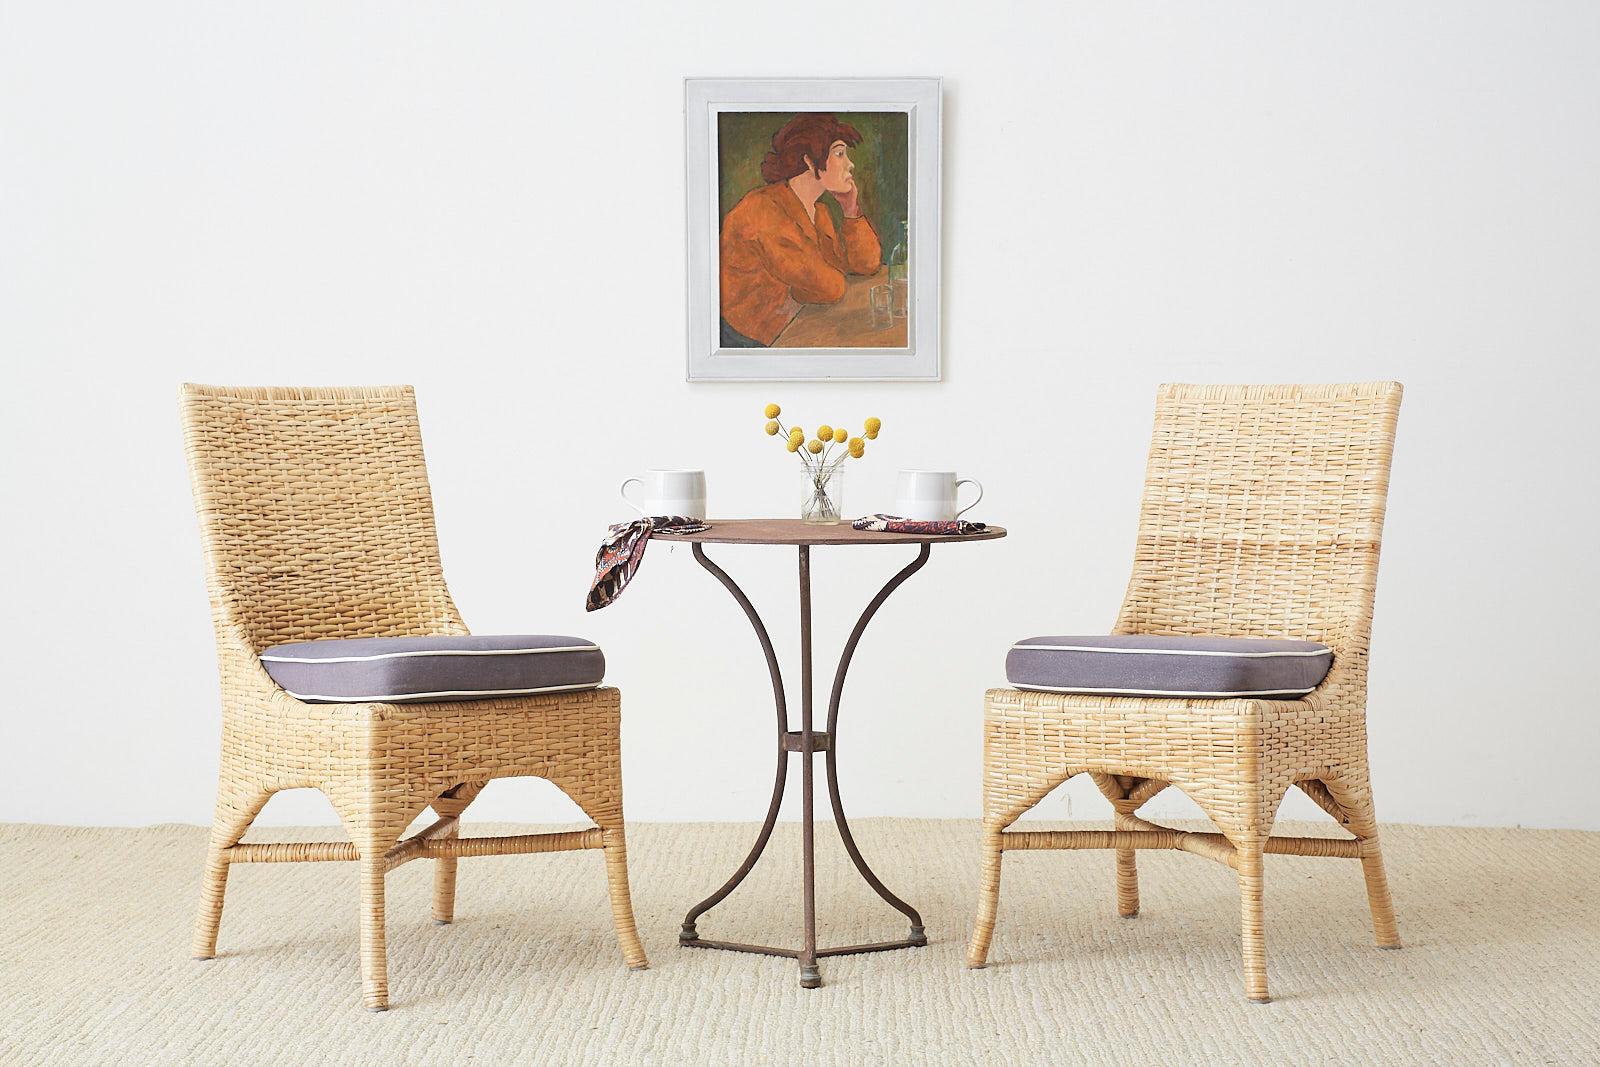 California organic modern style dining chairs made by McGuire furniture. Featuring a handcrafted rattan pole frame covered with woven wicker. The square back gracefully integrates into the seat accented by arches on the seat apron stretchers.